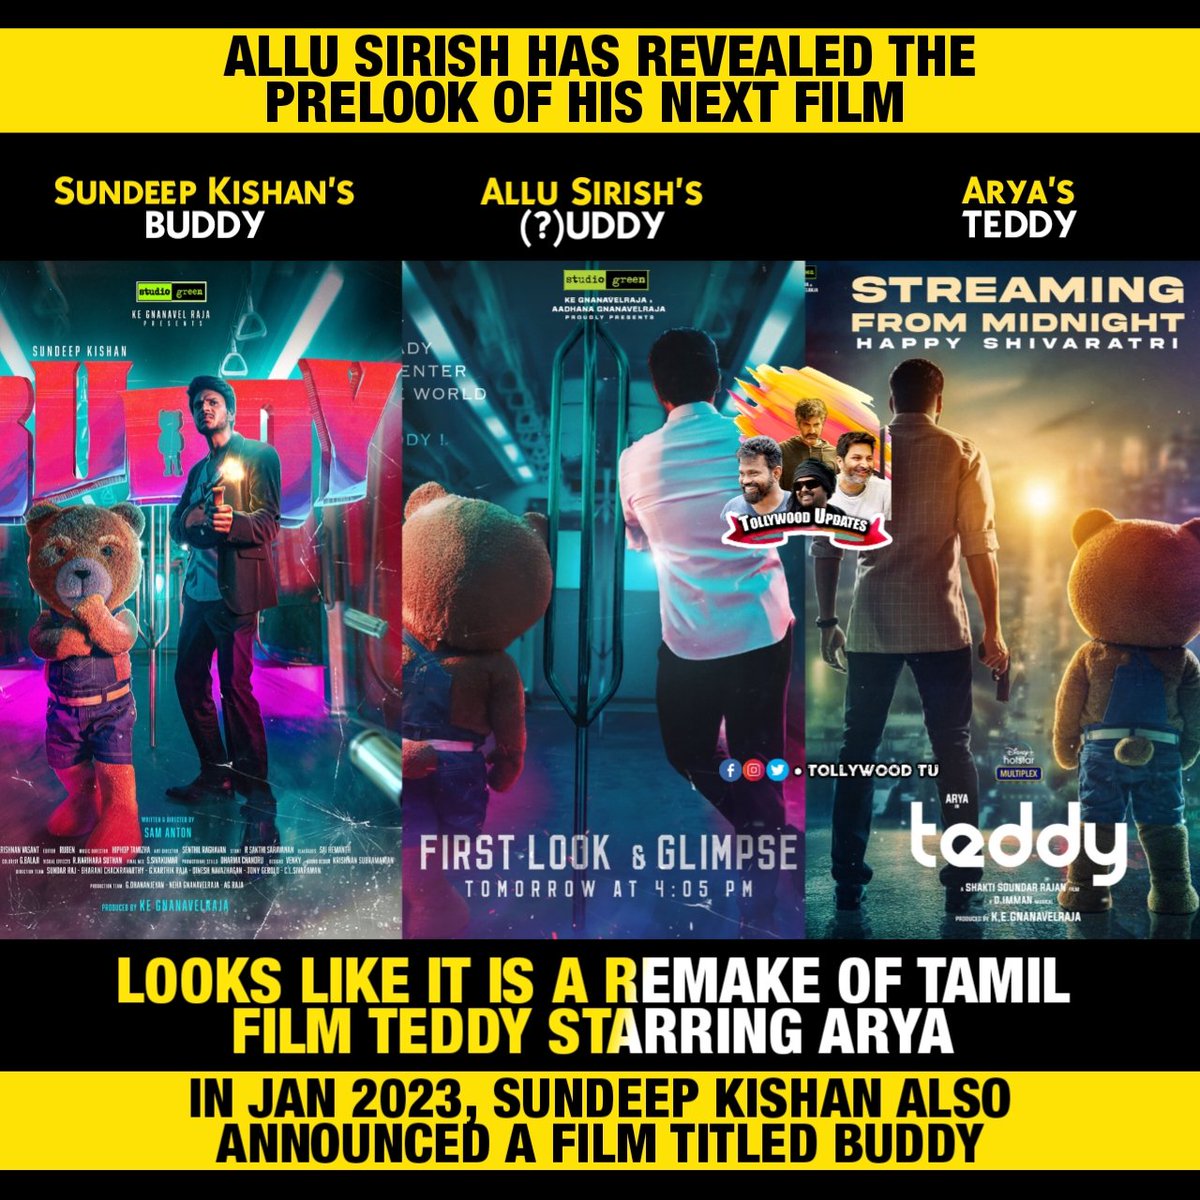 The Title, first look and Glimpse of #AlluSirish's next will be out tomorrow at 4.05 PM.

One common thing in all the 3 films is #StudioGreen is the producer. 

#Arya's #Teddy is already available in Telugu. There is no point in remaking it again as #Buddy or (?)uddy.